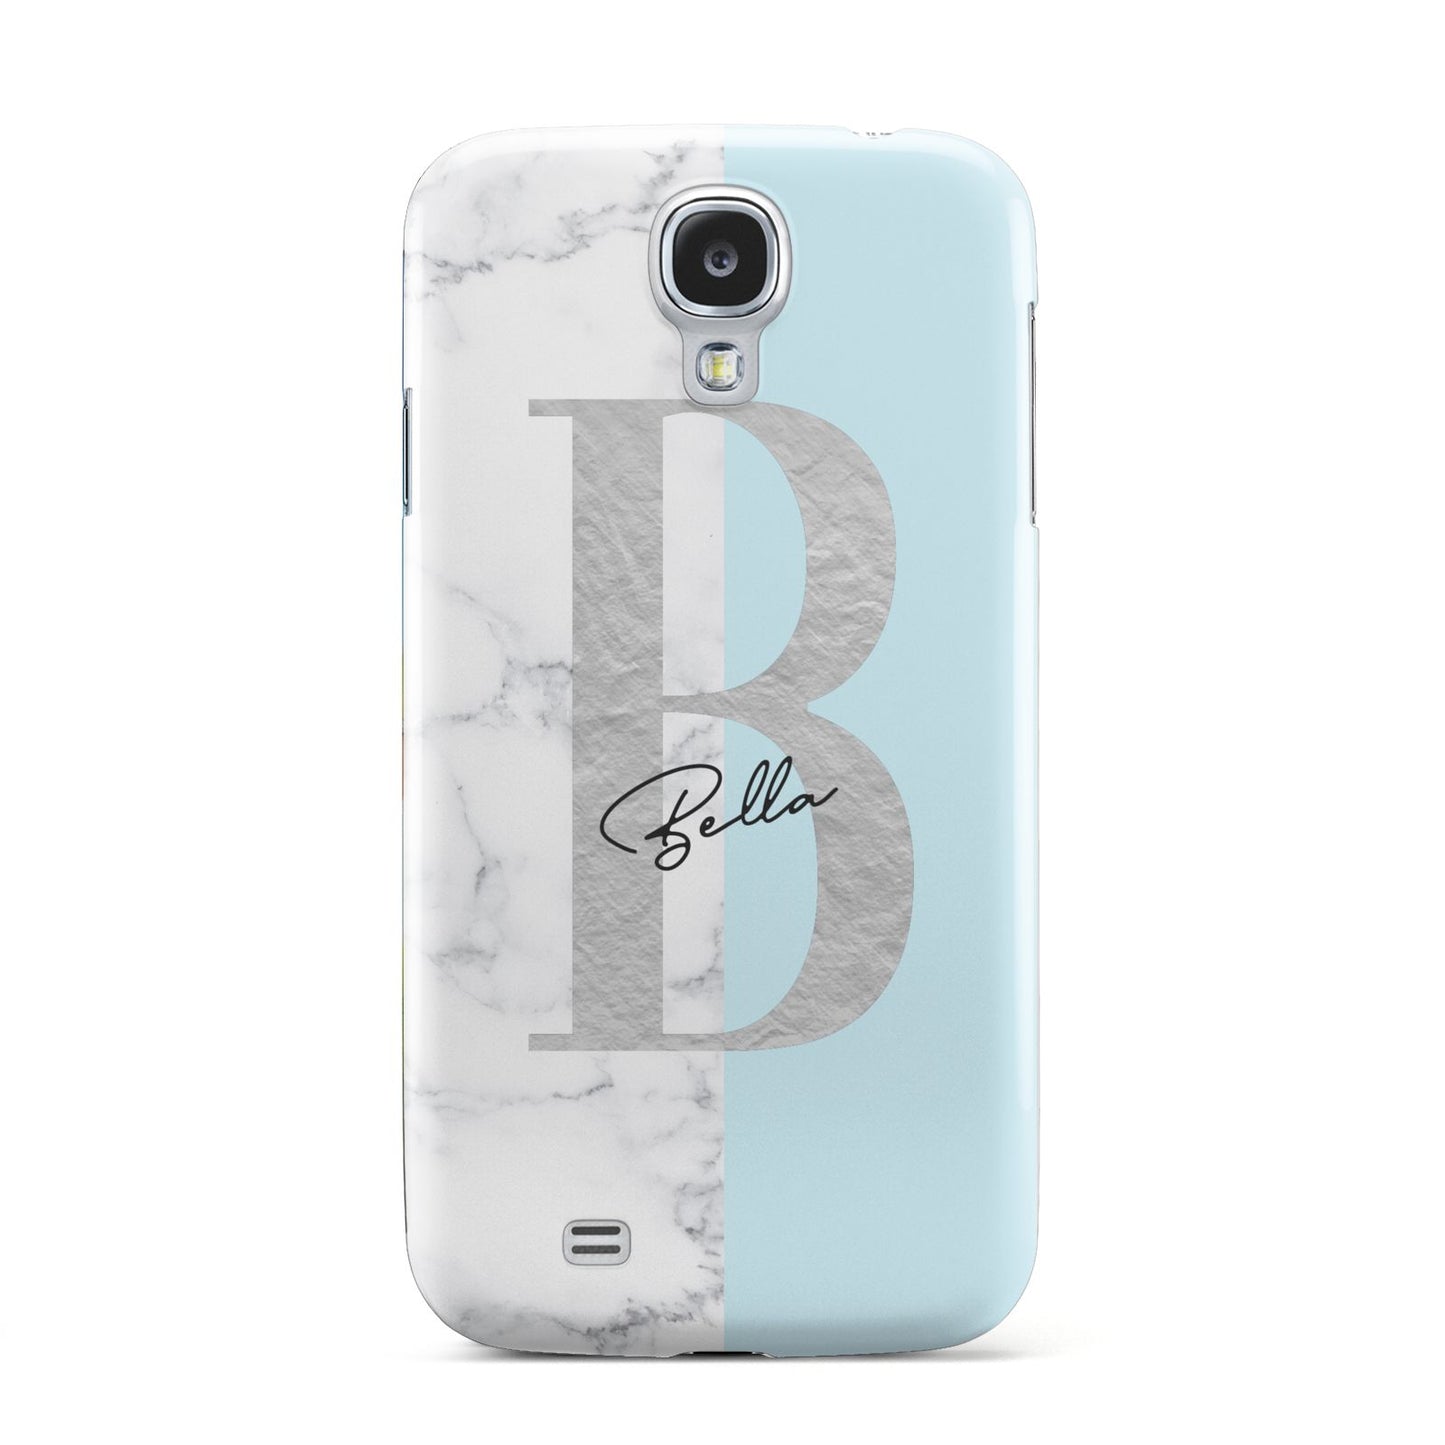 Personalised Chrome Marble Samsung Galaxy S4 Case